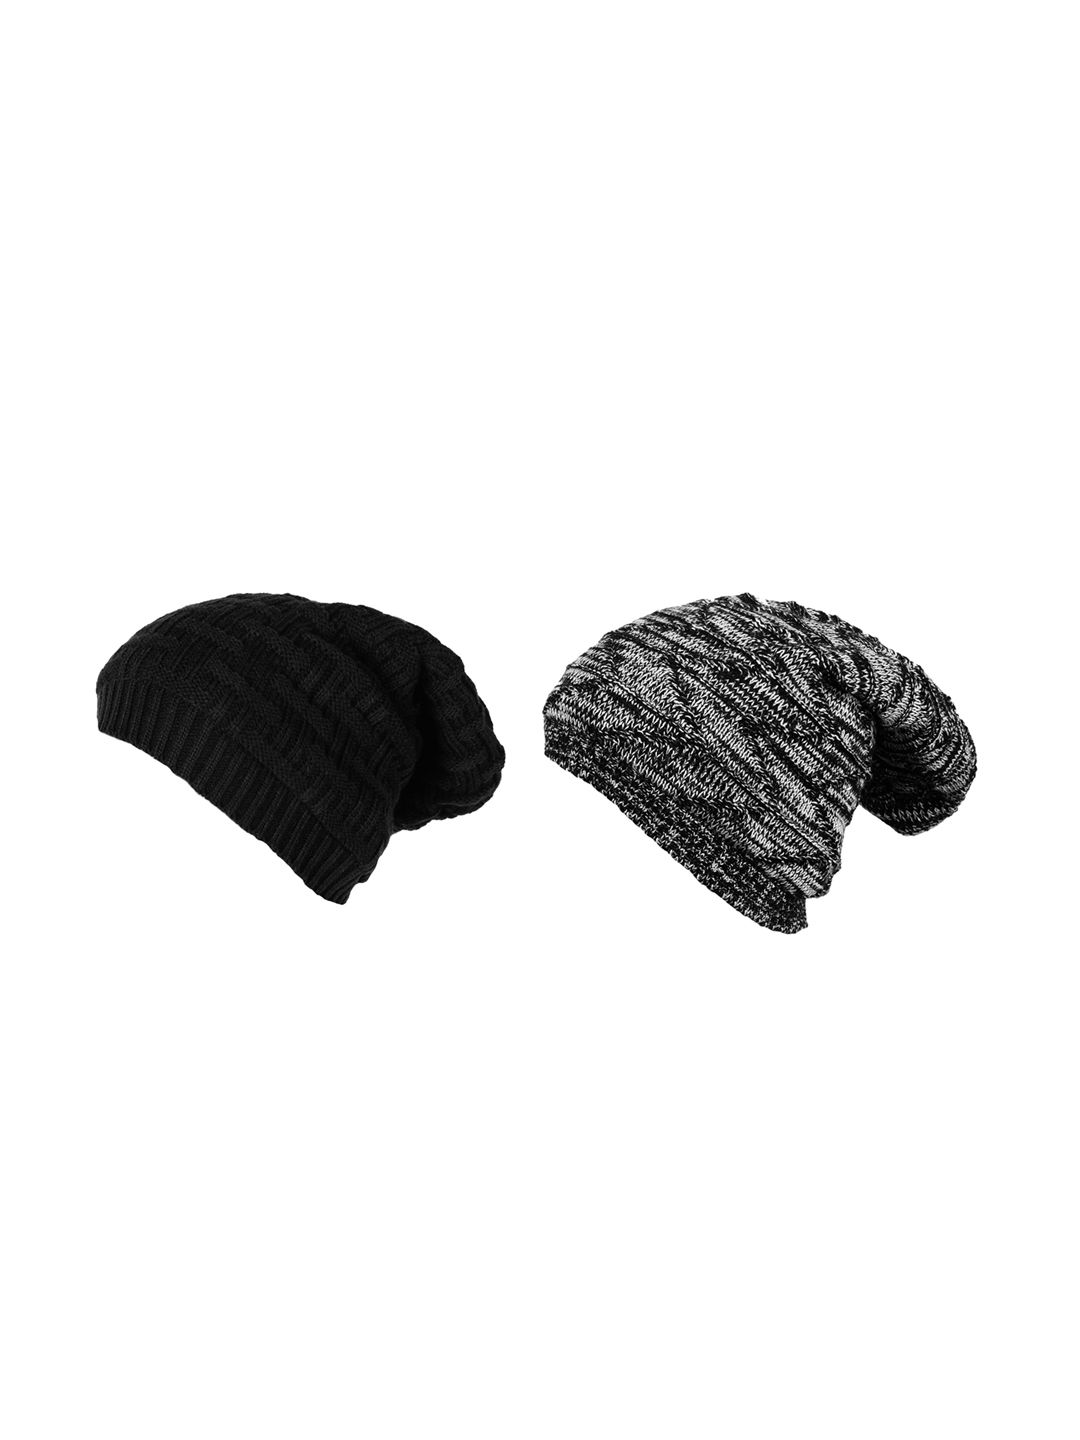 Knotyy Pack of 2 Unisex Black & Grey Colourblocked Beanie Price in India